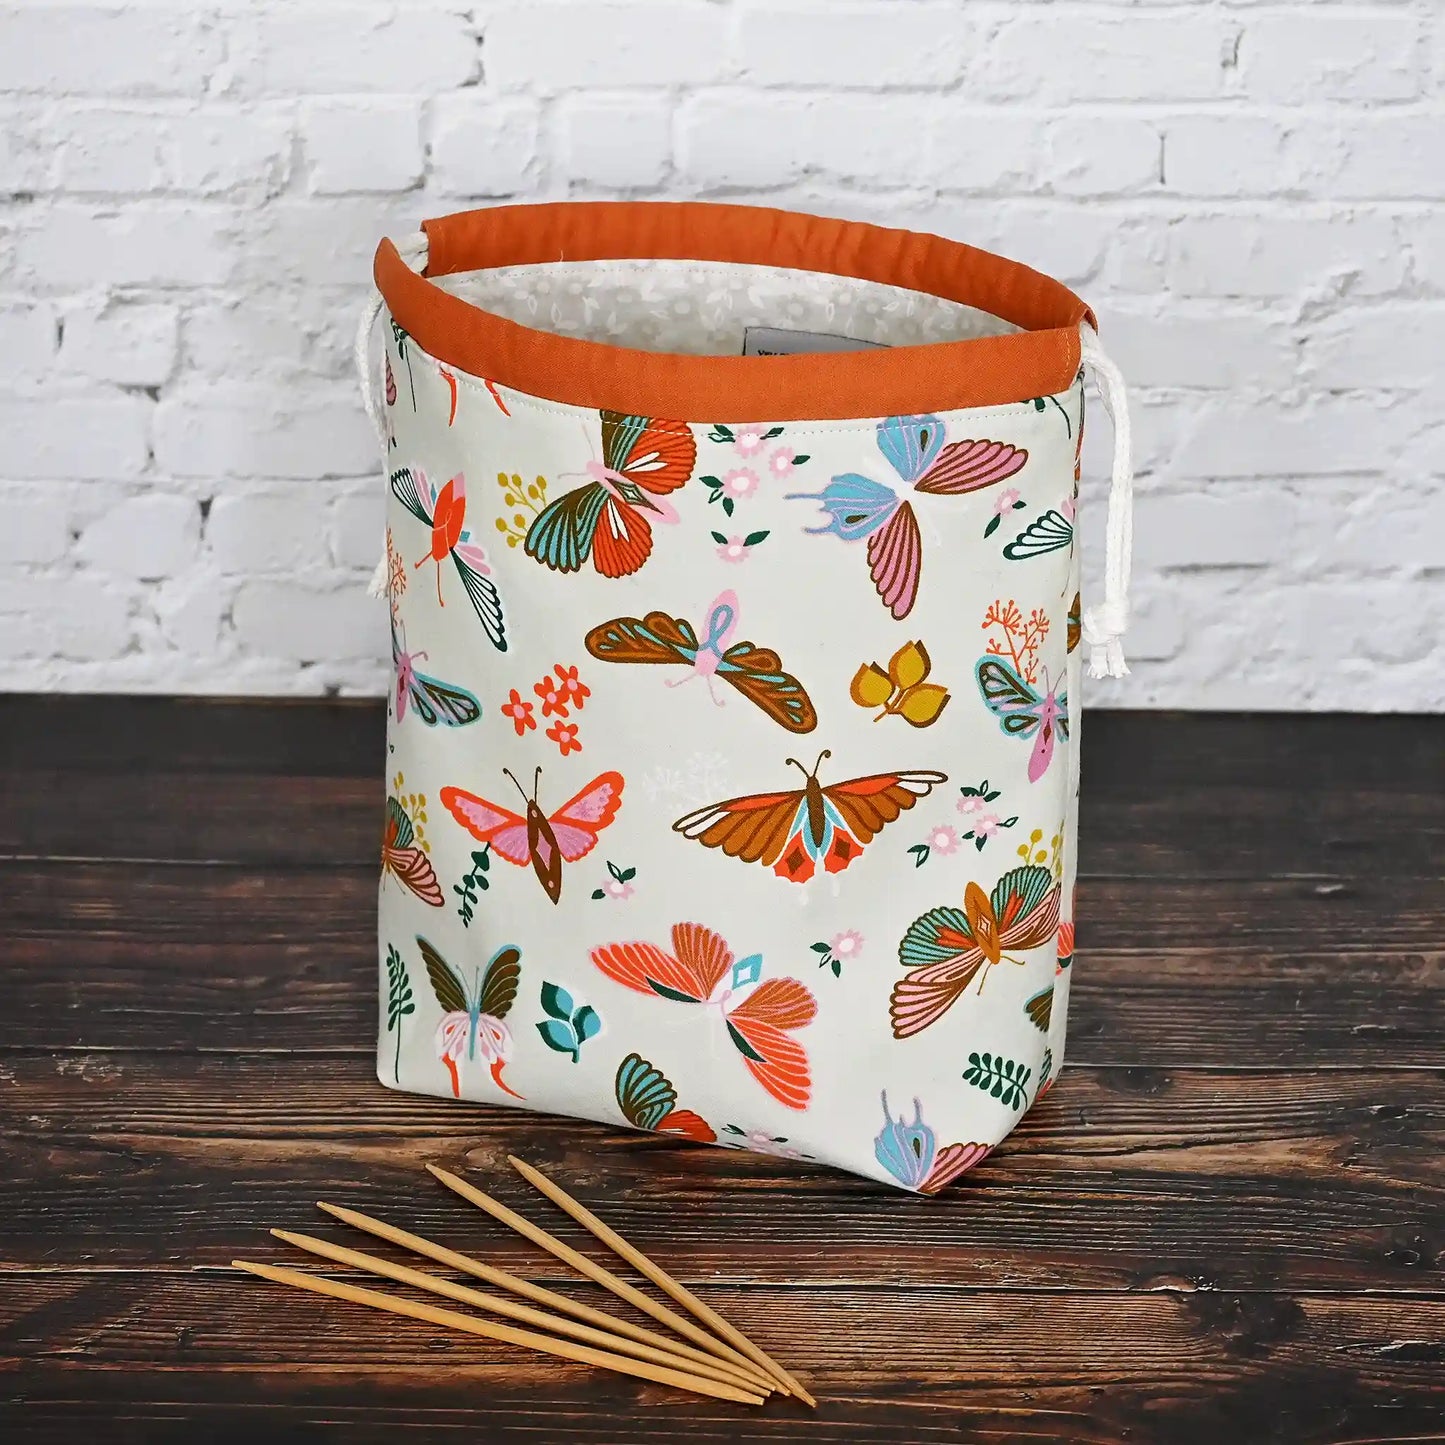 Beautiful butterfly themed drawstring project bag, lined in a pretty cream floral and with pockets.  Made in Canada by Yellow Petal Handmade.